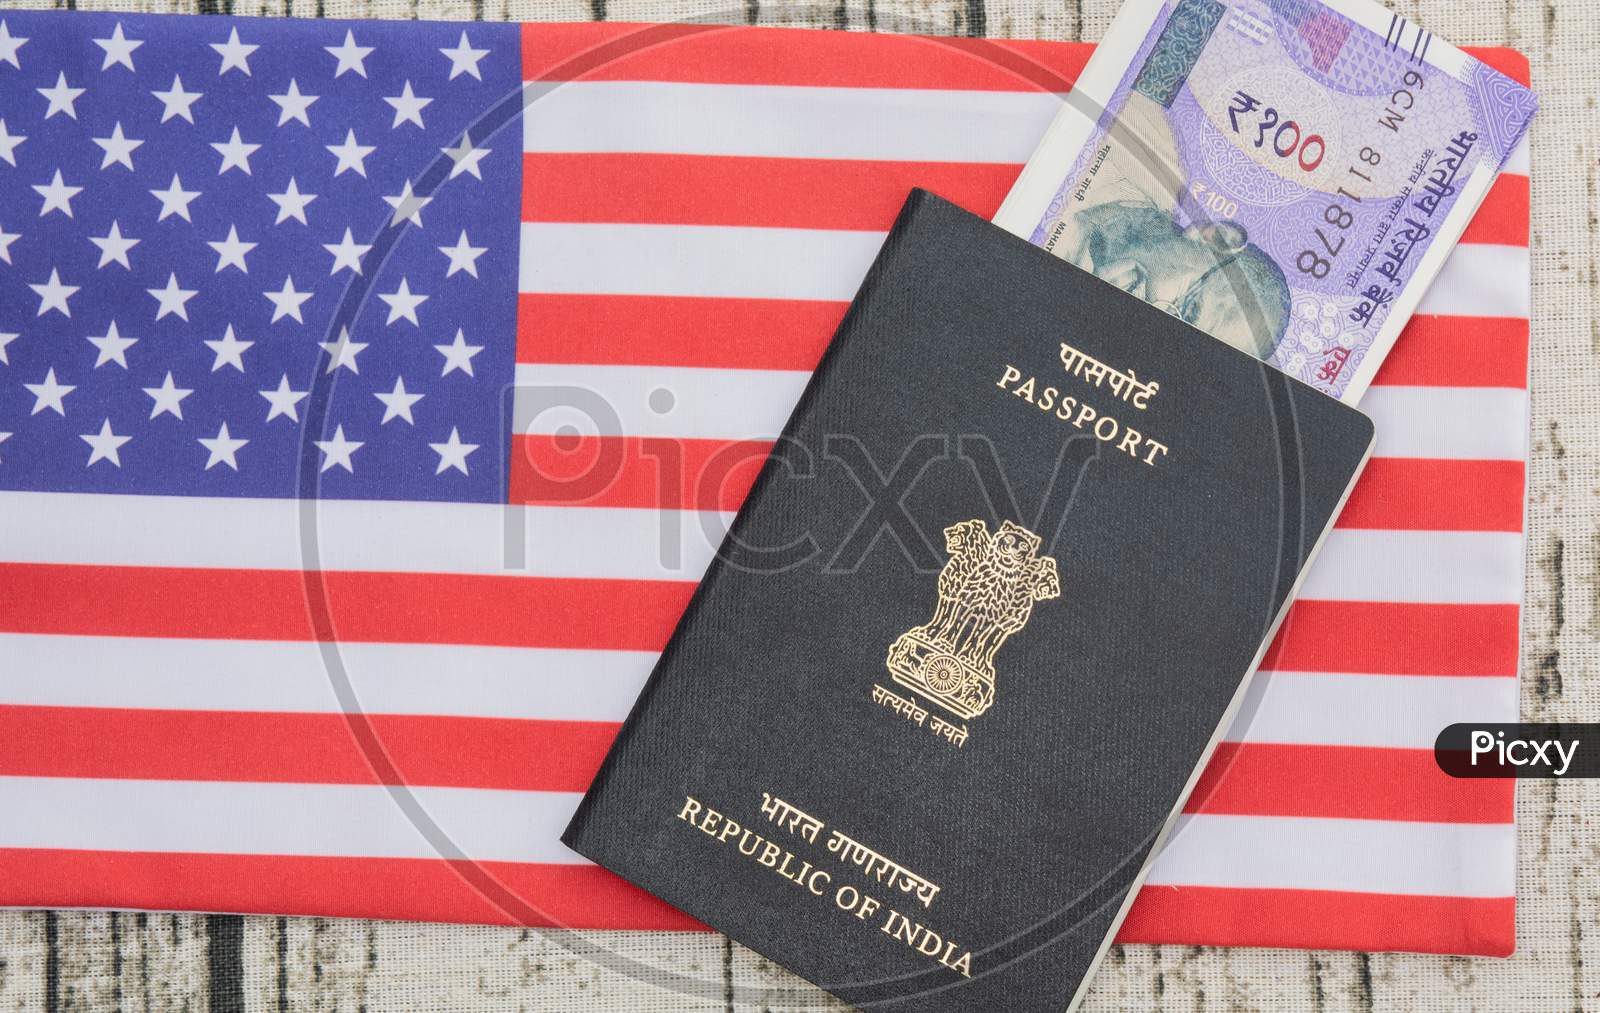 Indian Passport With Currency On Usa Or America'S Flag As A Background